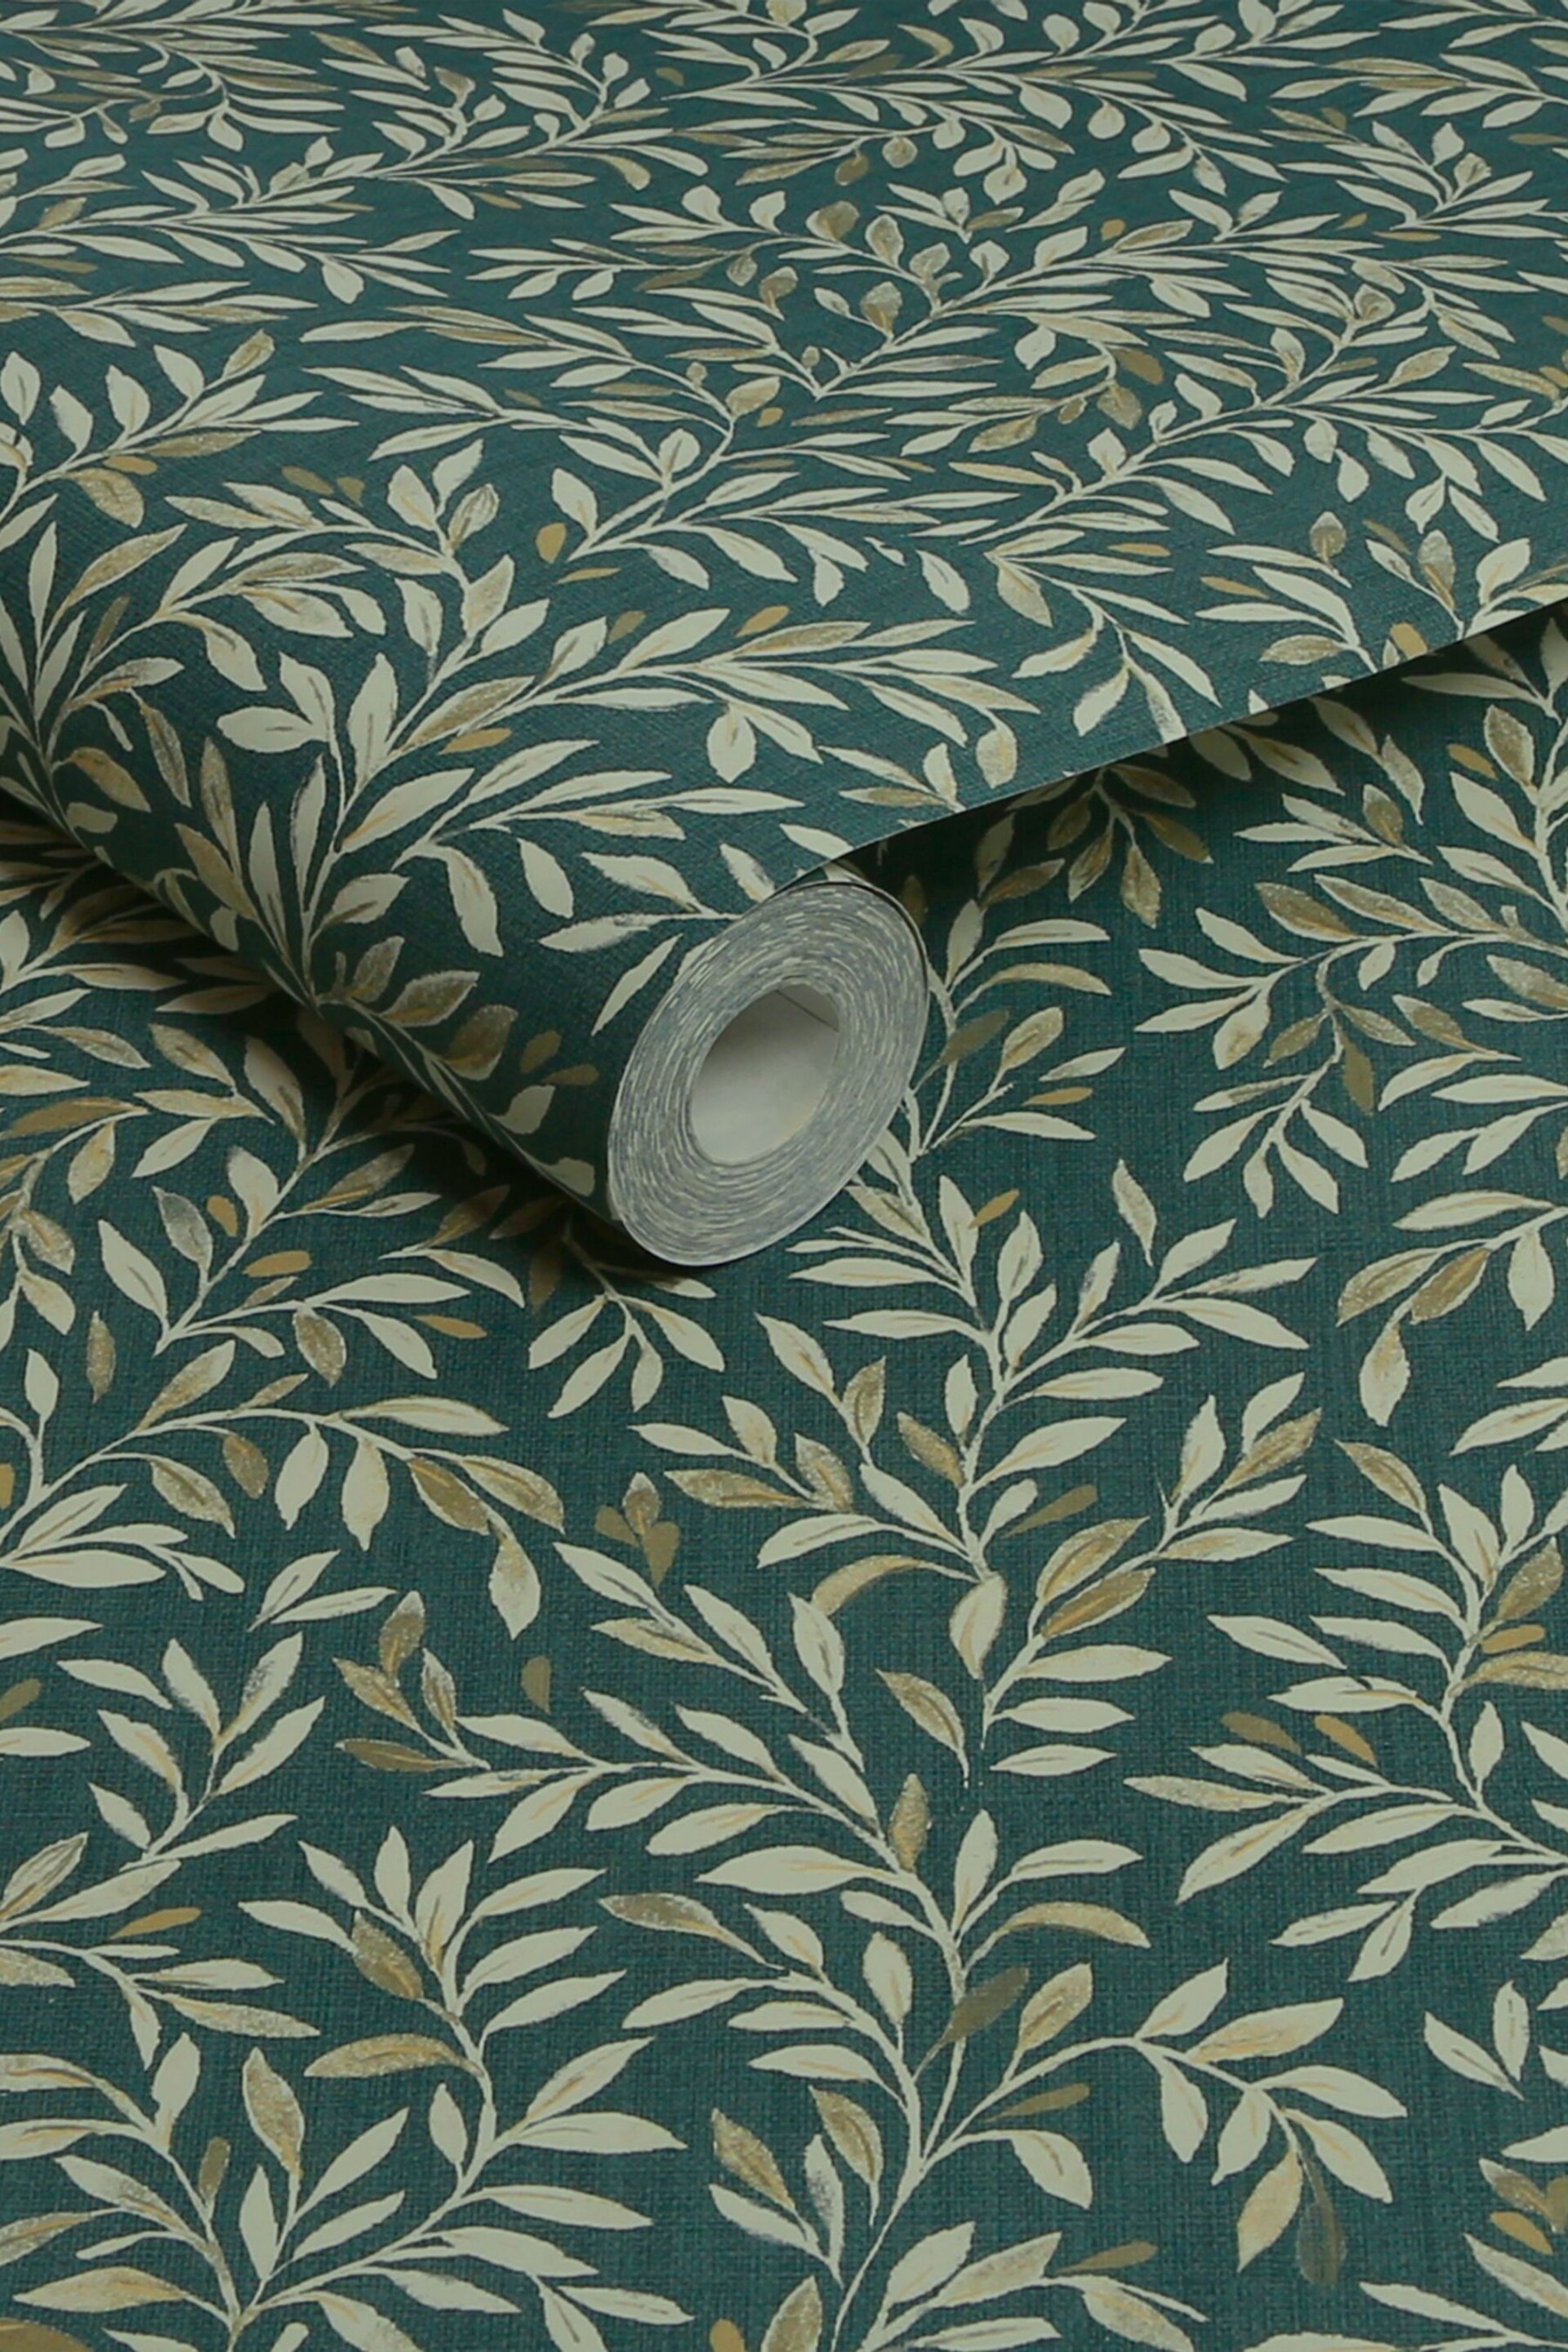 Emerald Green Ditsy Leaf Wallpaper - Image 4 of 4